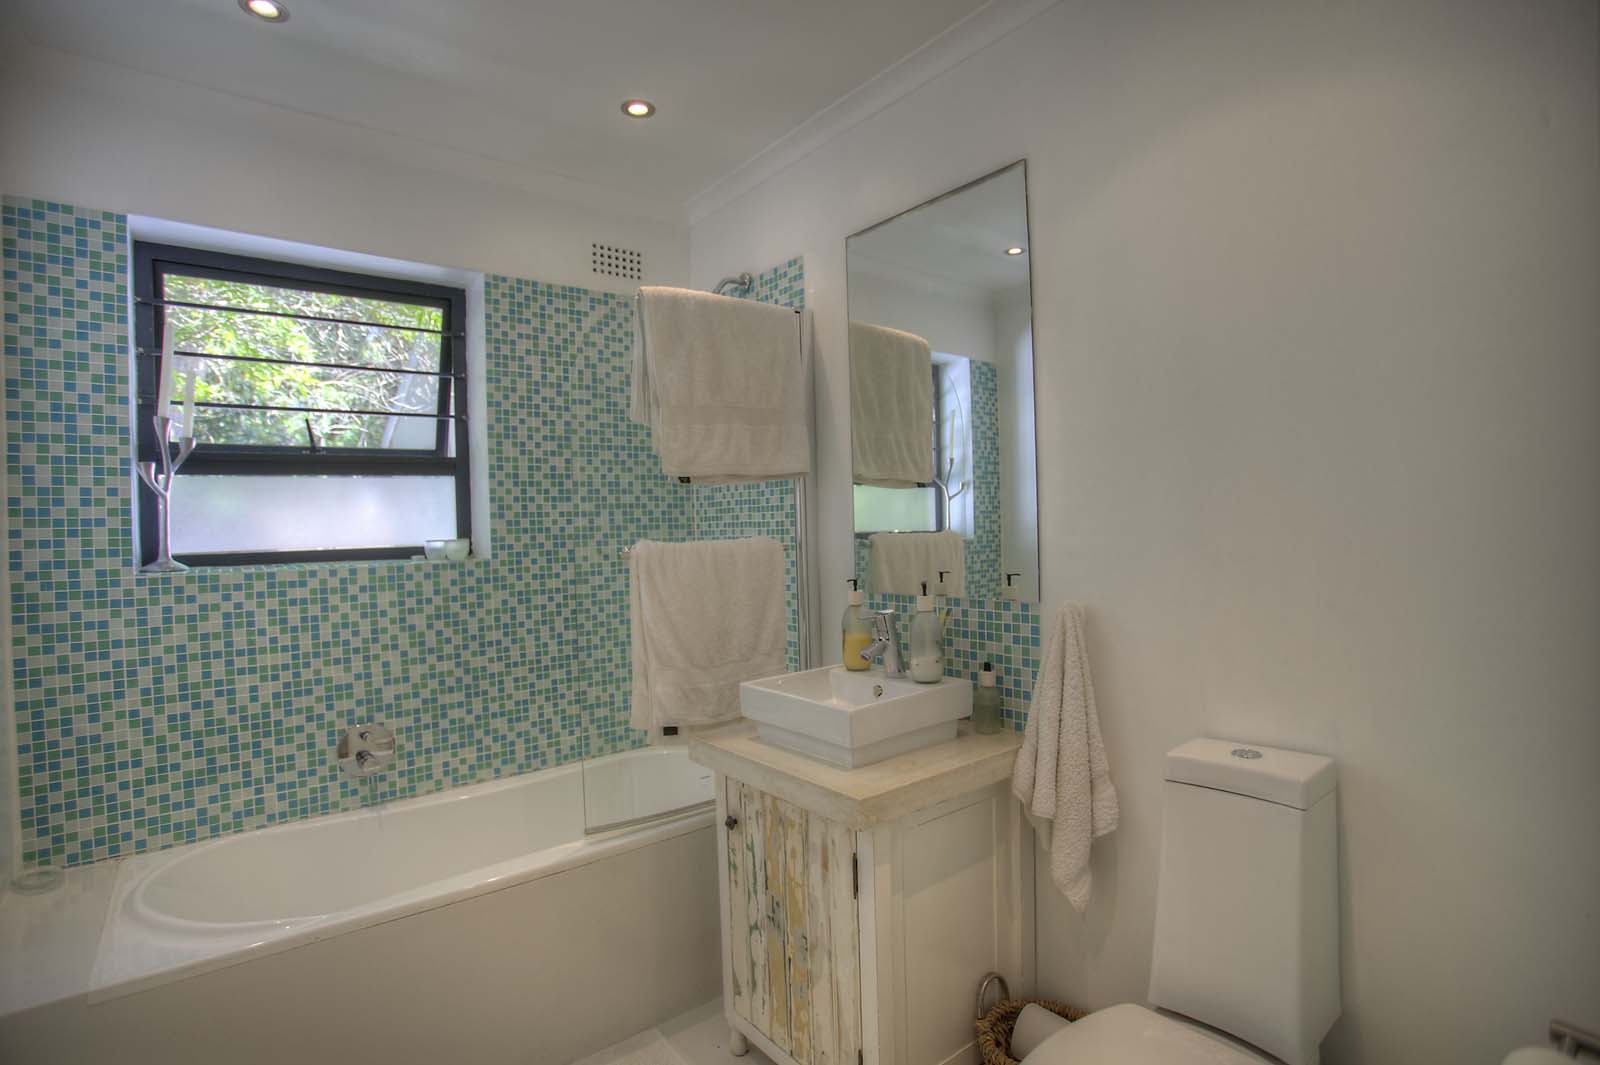 Photo 8 of Villa Robertson accommodation in Constantia, Cape Town with 4 bedrooms and 3 bathrooms